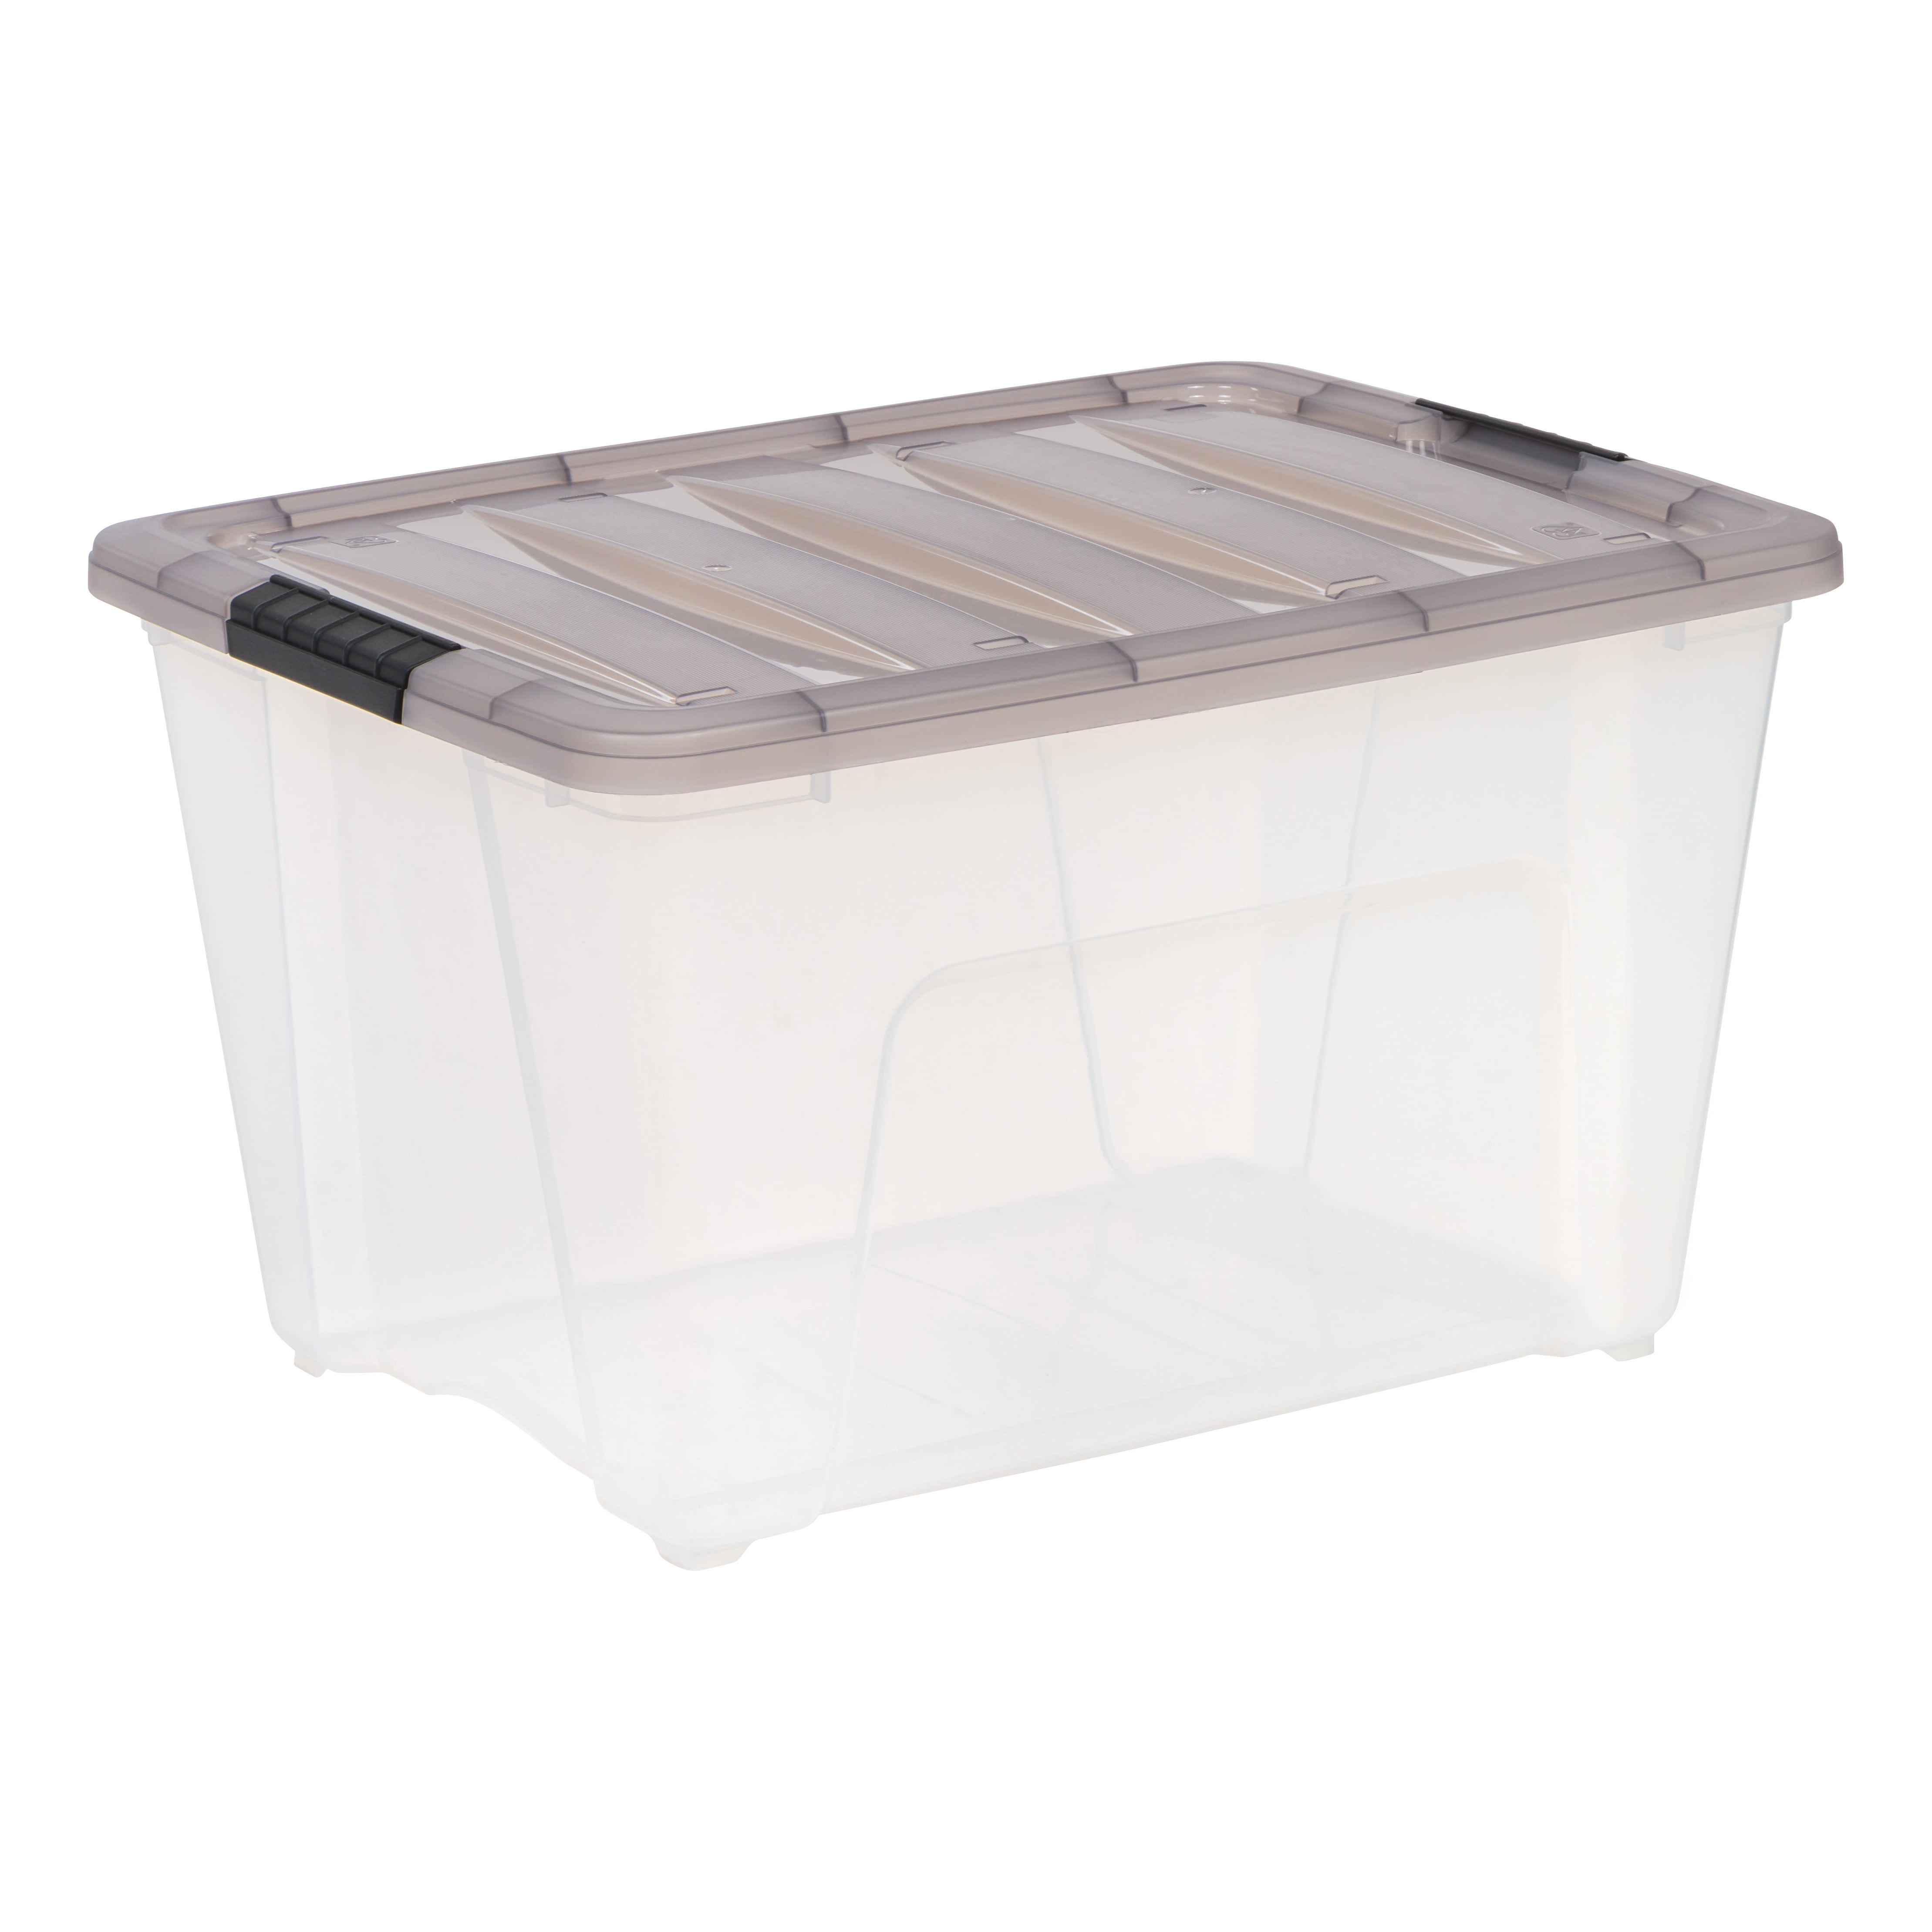 19 qt. Plastic Stackable Storage Bins for Pantry in Black (4-Pack)